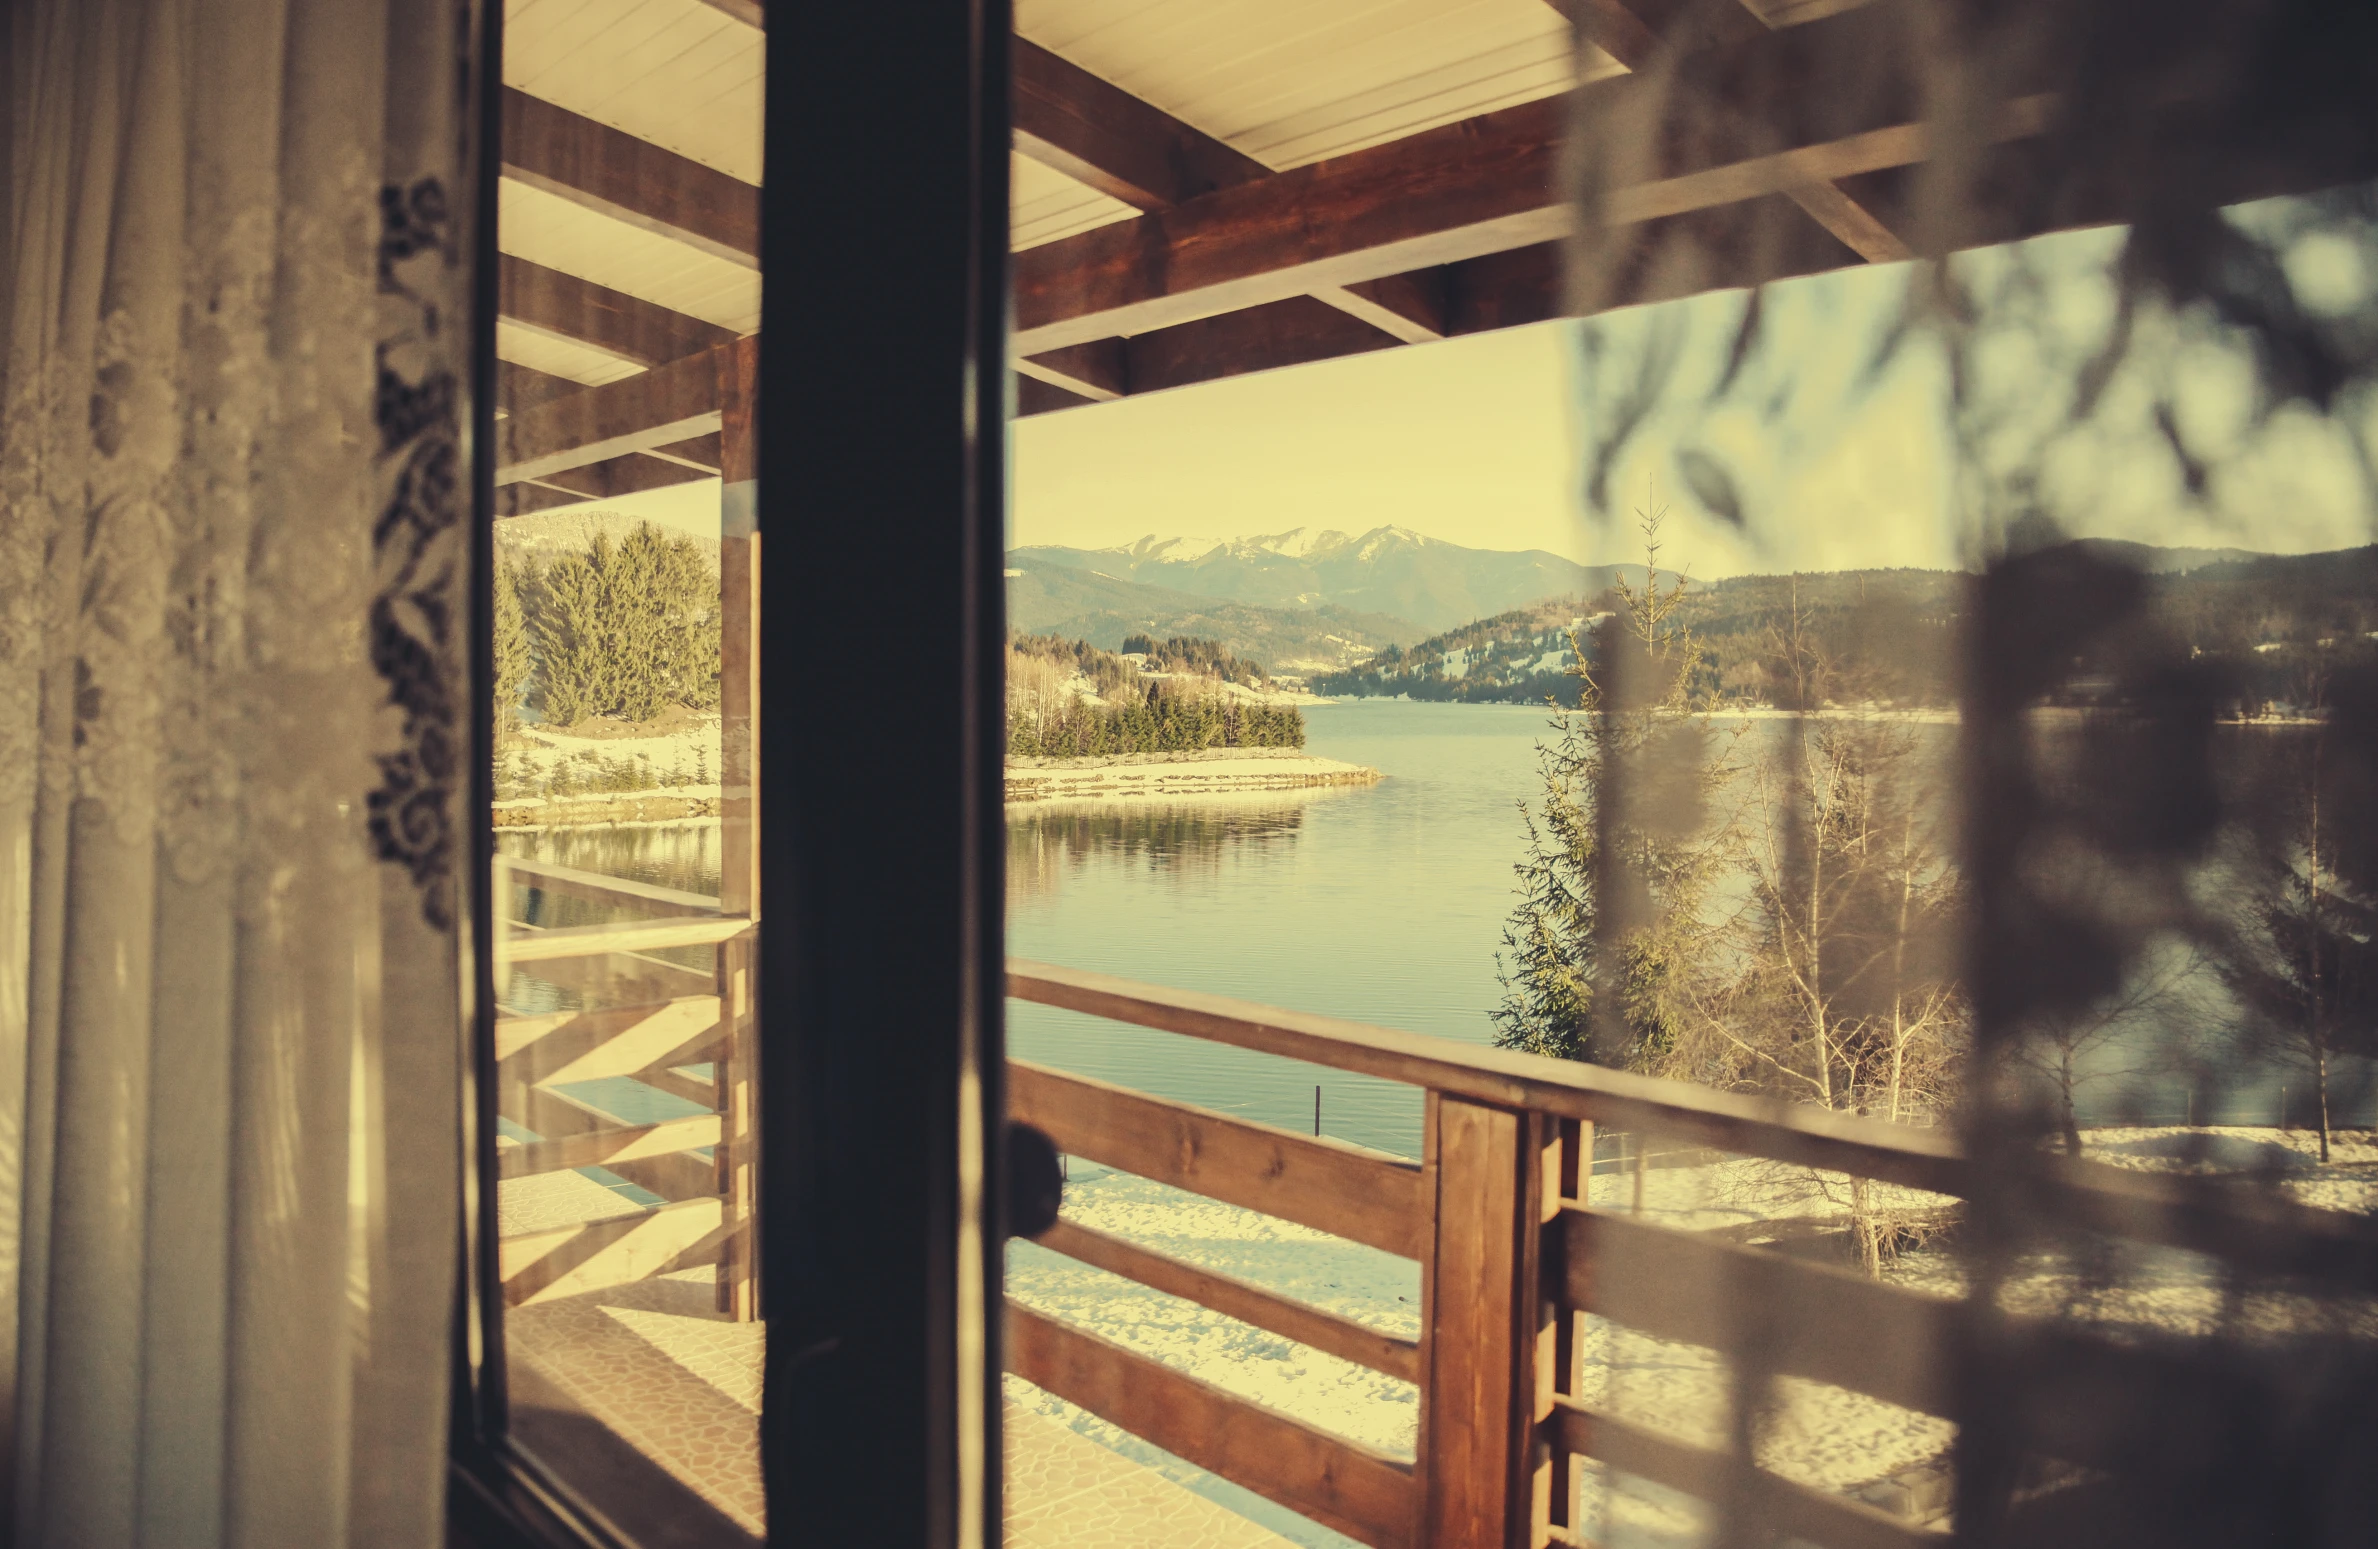 the view out a window at a lake with mountains in the distance